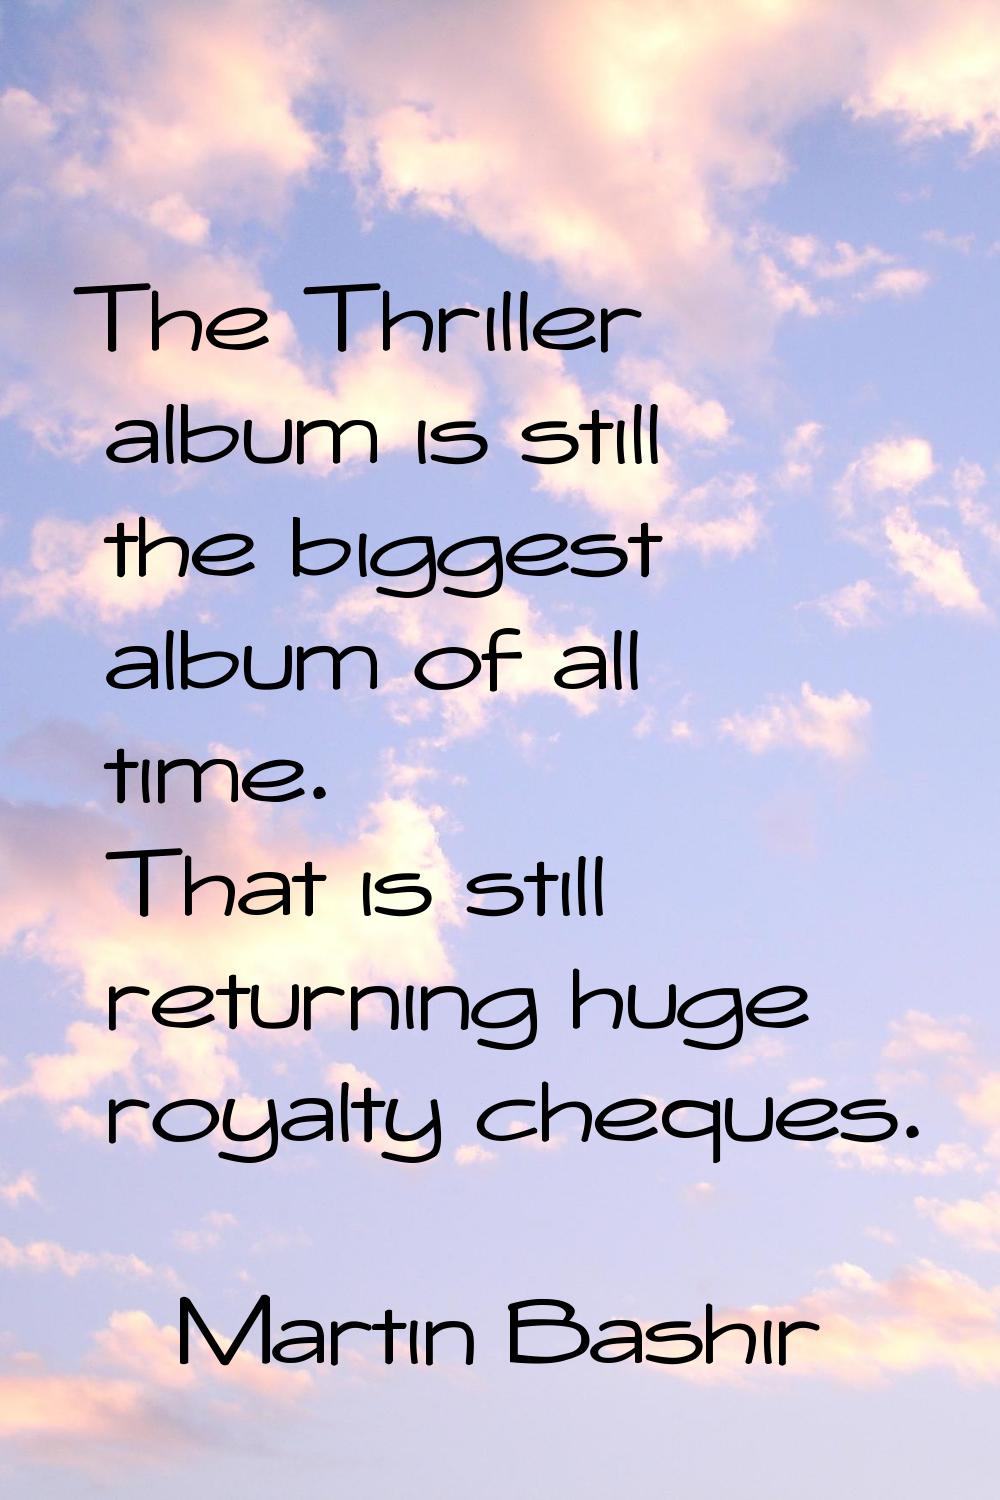 The Thriller album is still the biggest album of all time. That is still returning huge royalty che